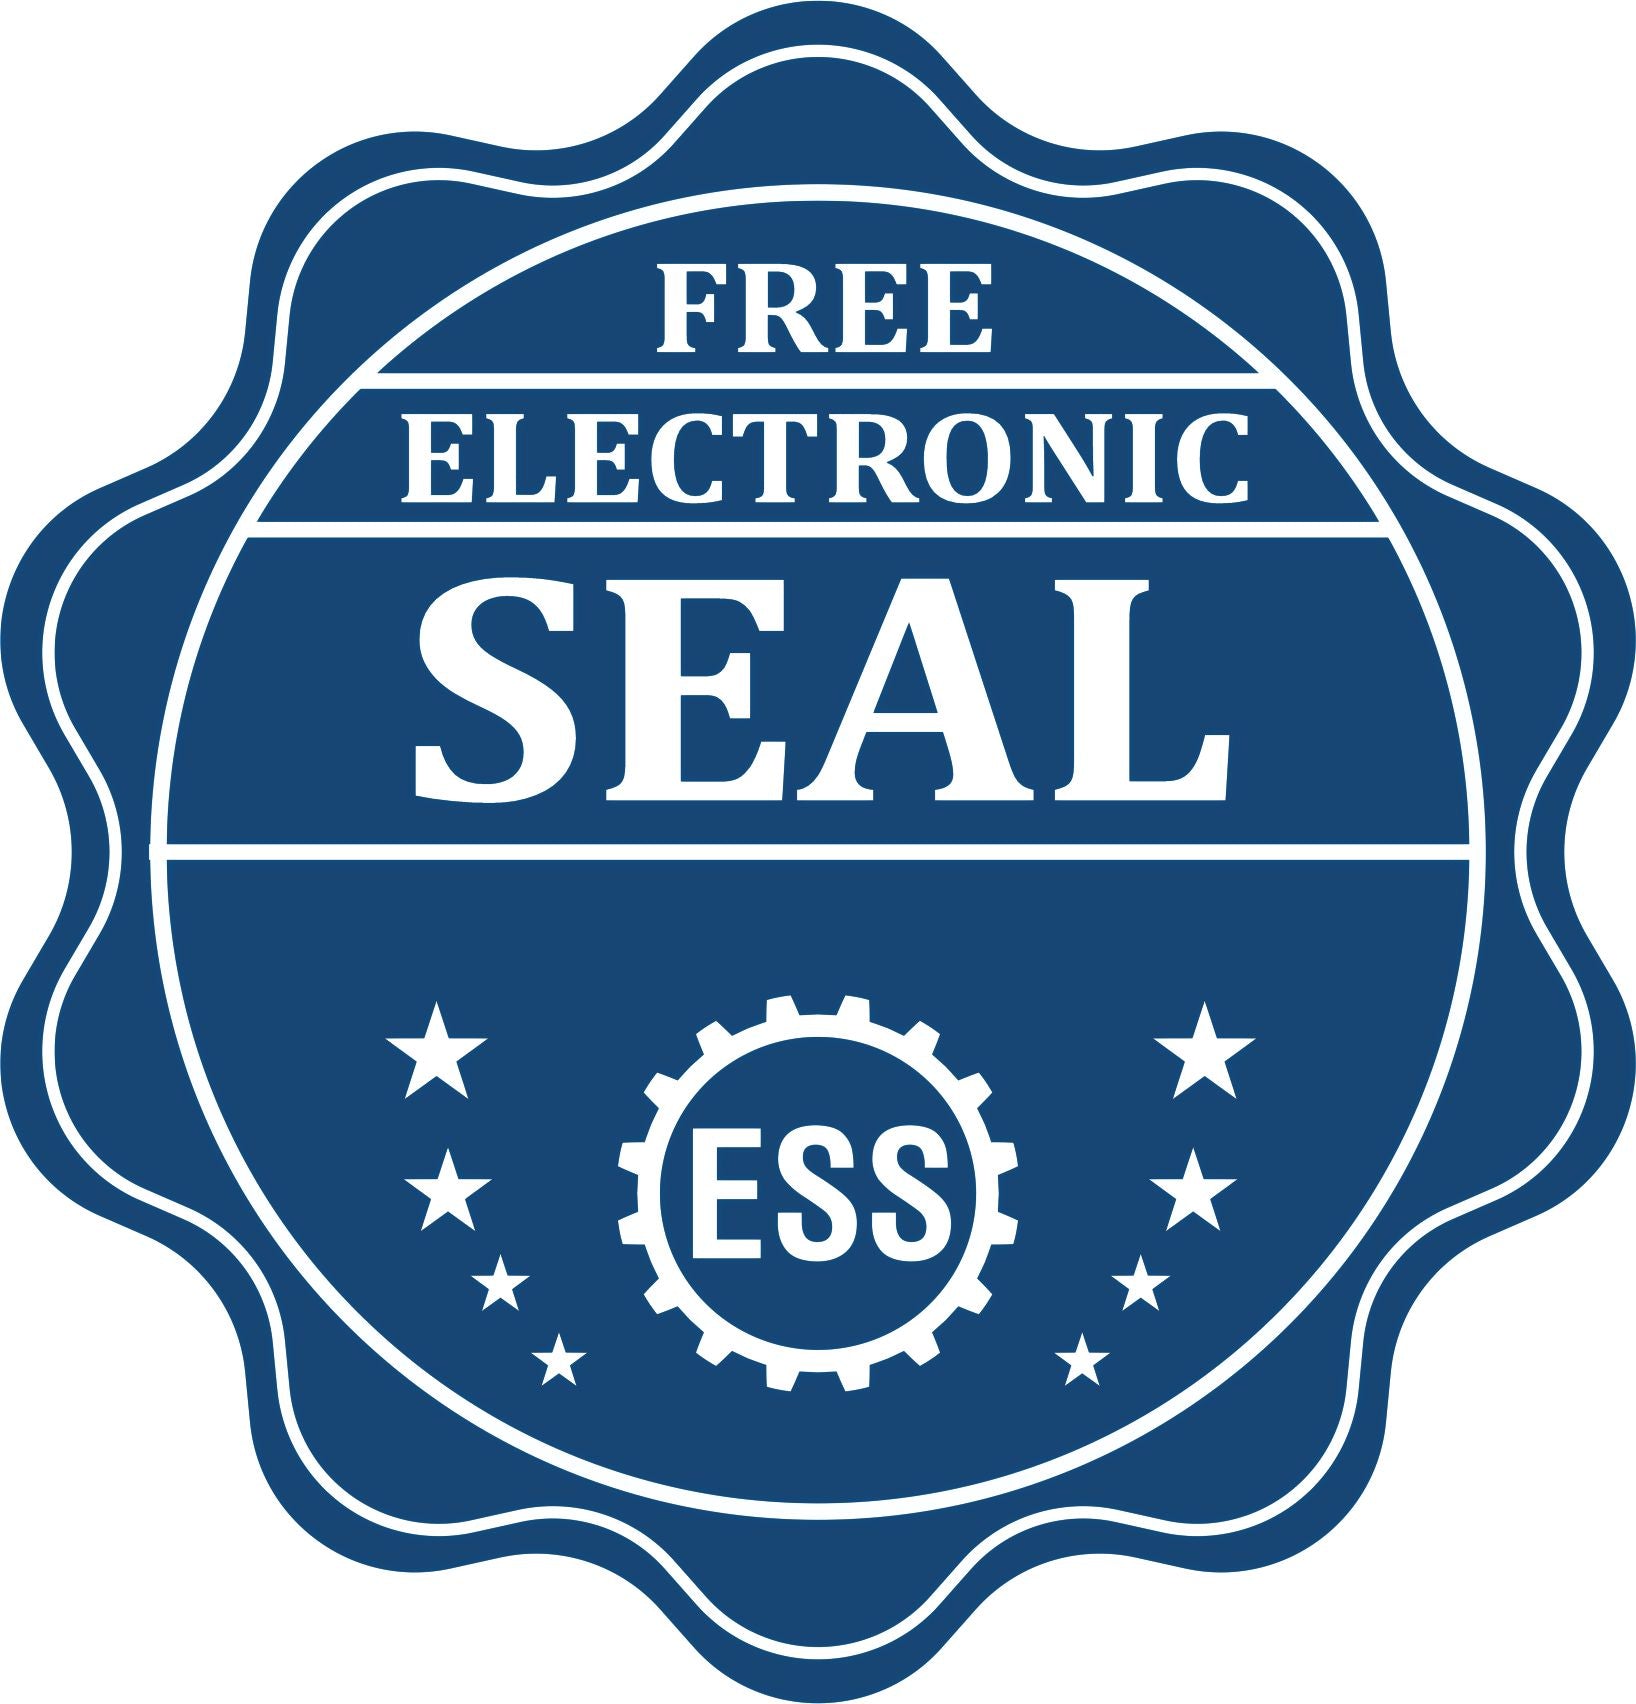 A badge showing a free electronic seal for the Handheld Tennessee Land Surveyor Seal with stars and the ESS gear on the emblem.